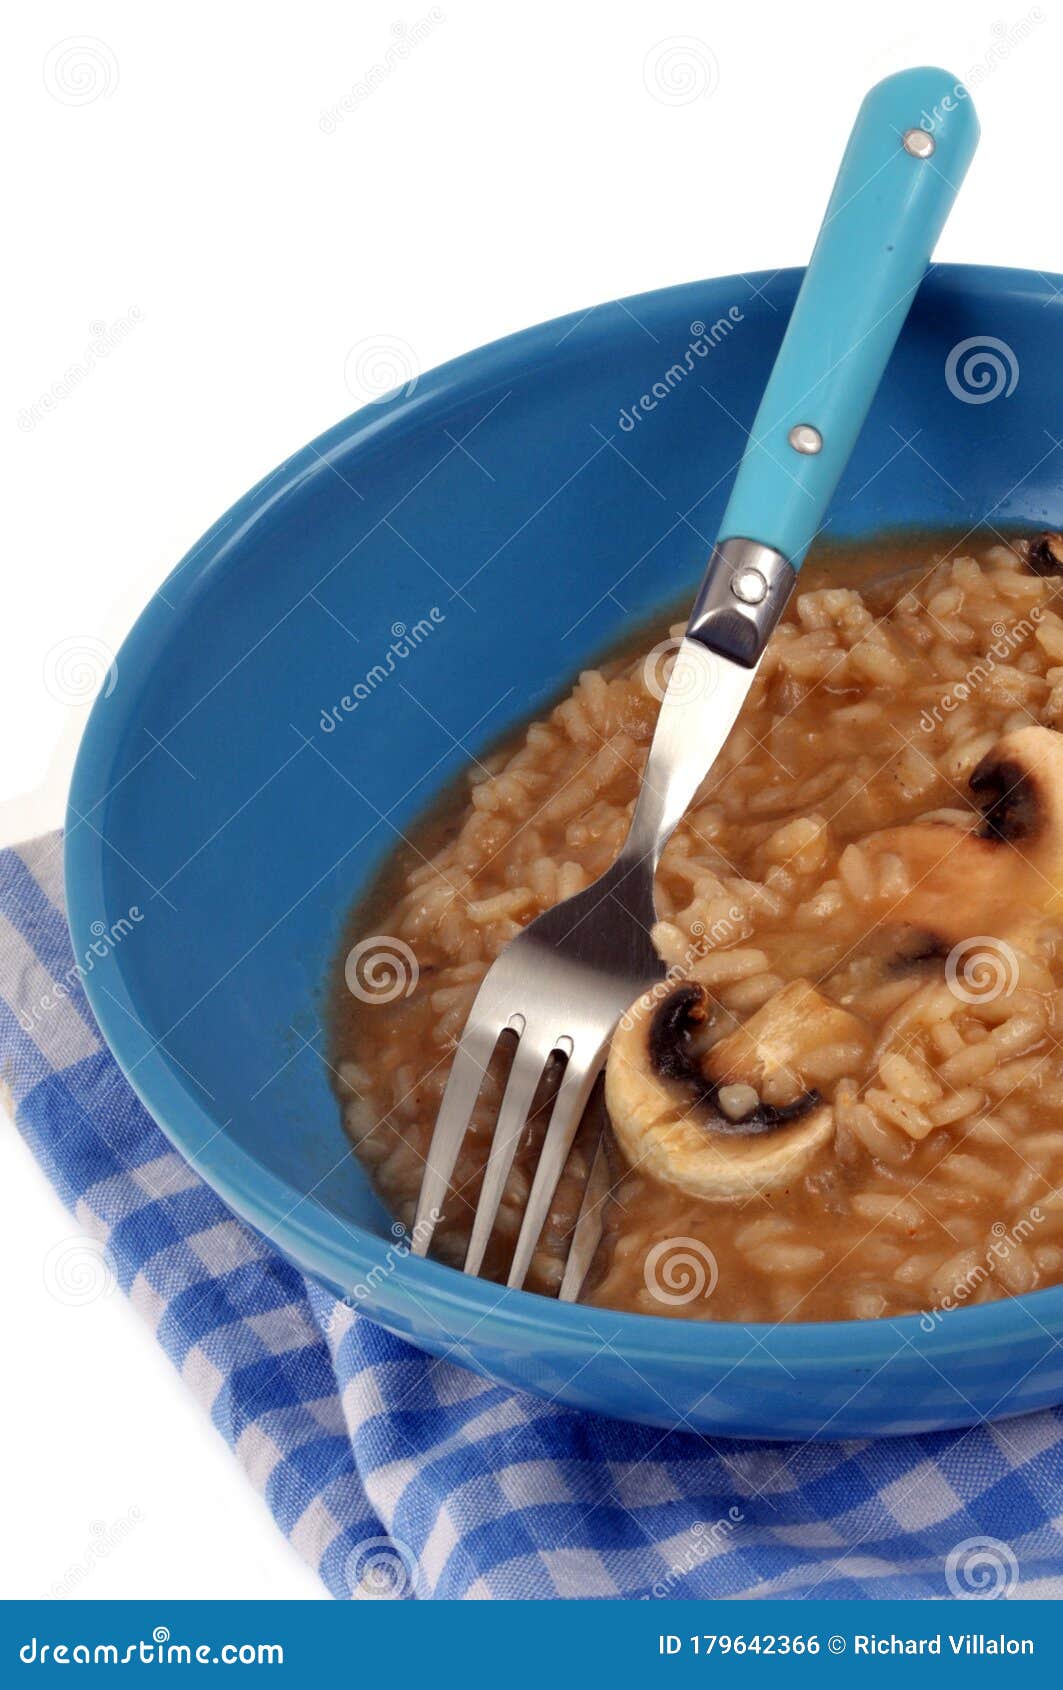 plate of mushroom risotto with fork close-up on white background